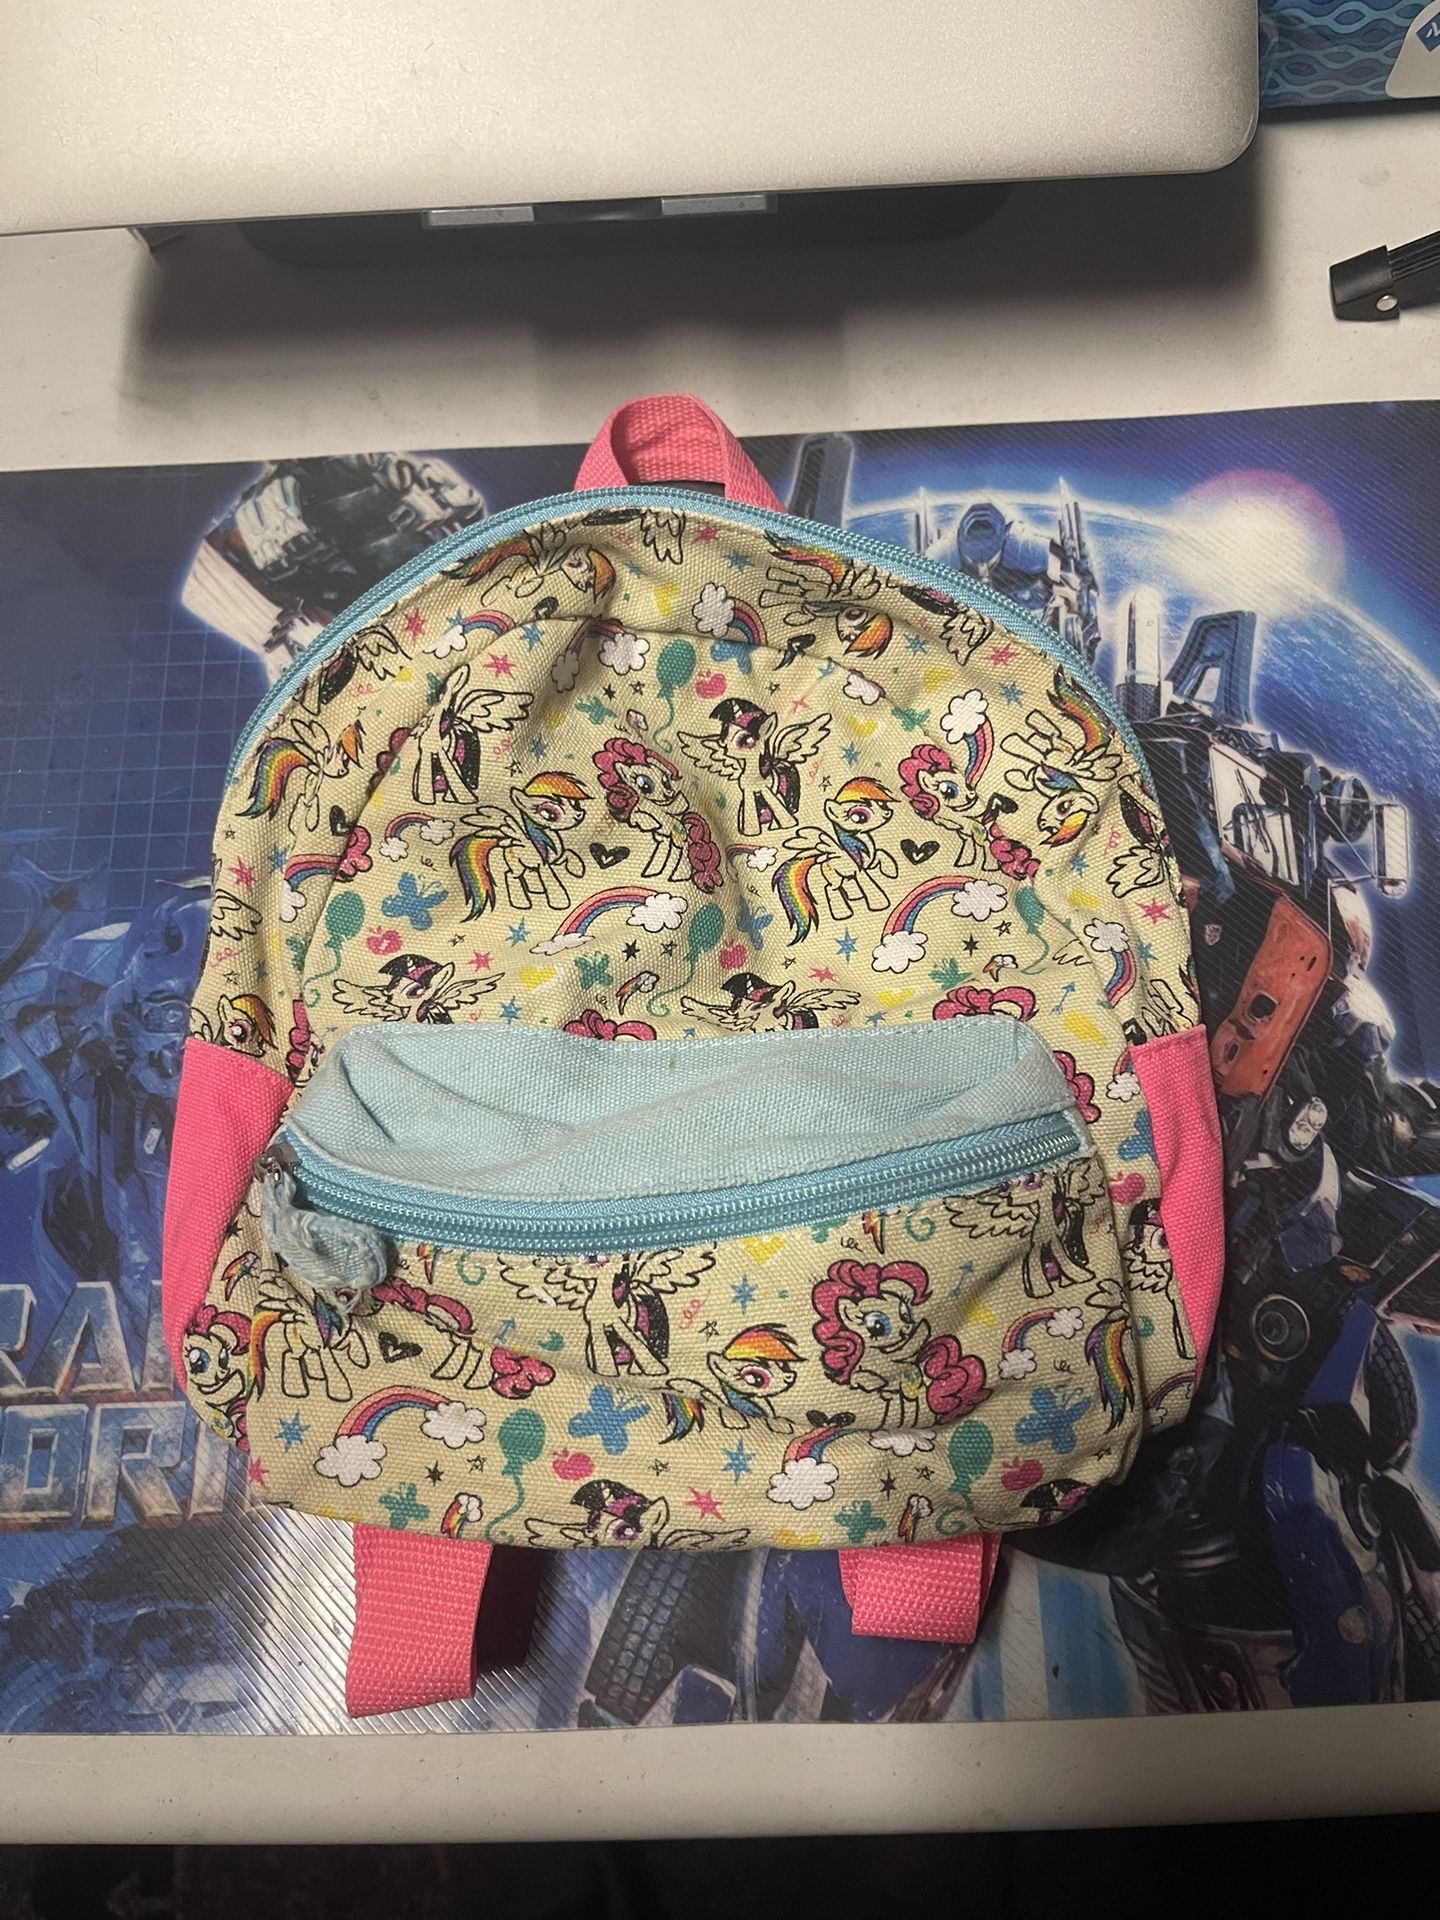 My Little Pony Backpack 